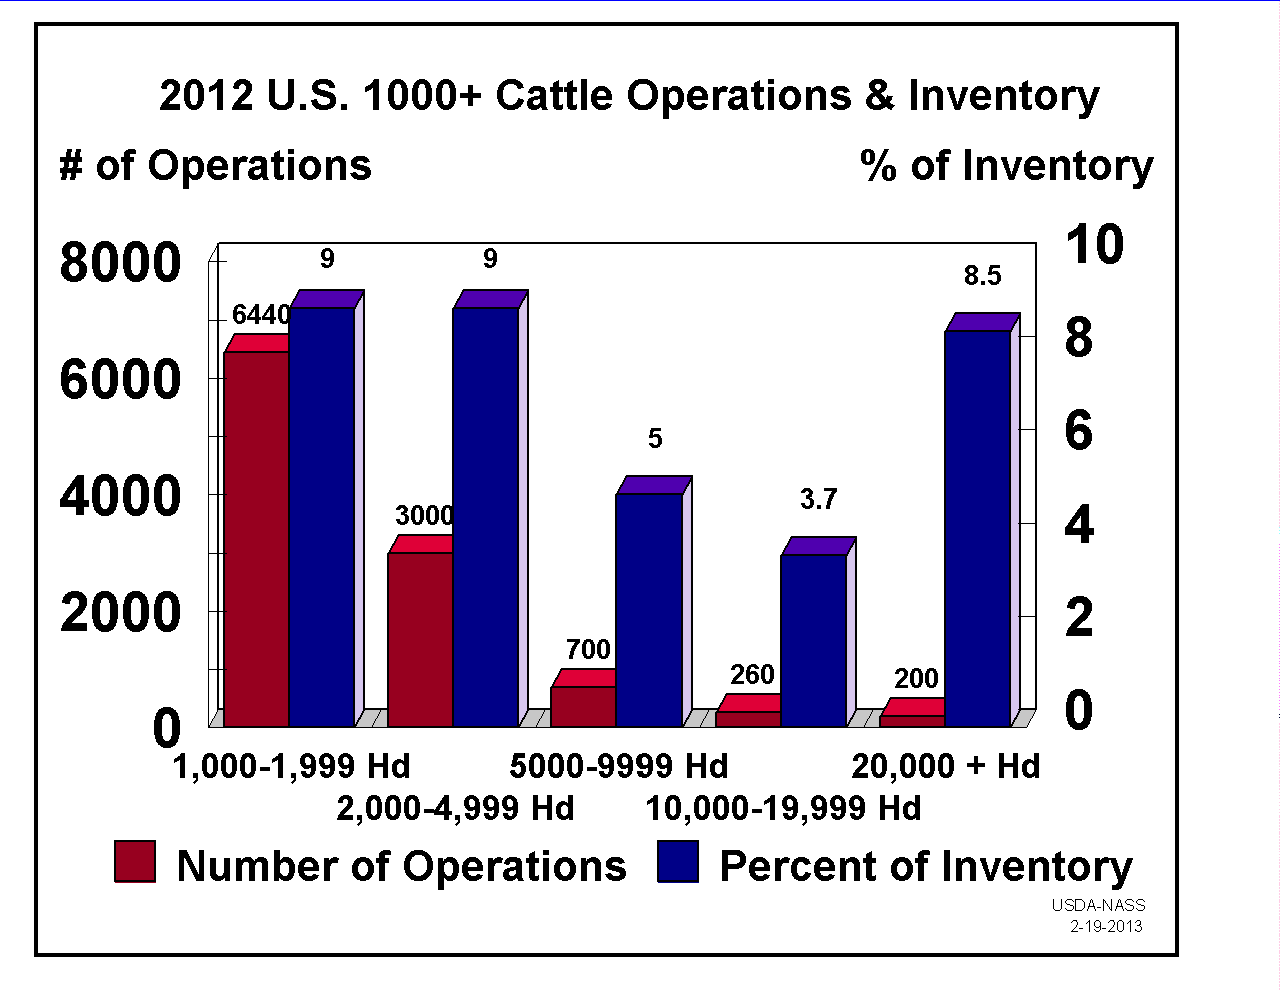 Cattle: Operations and Inventory by 1,000+ Head Size Group, US